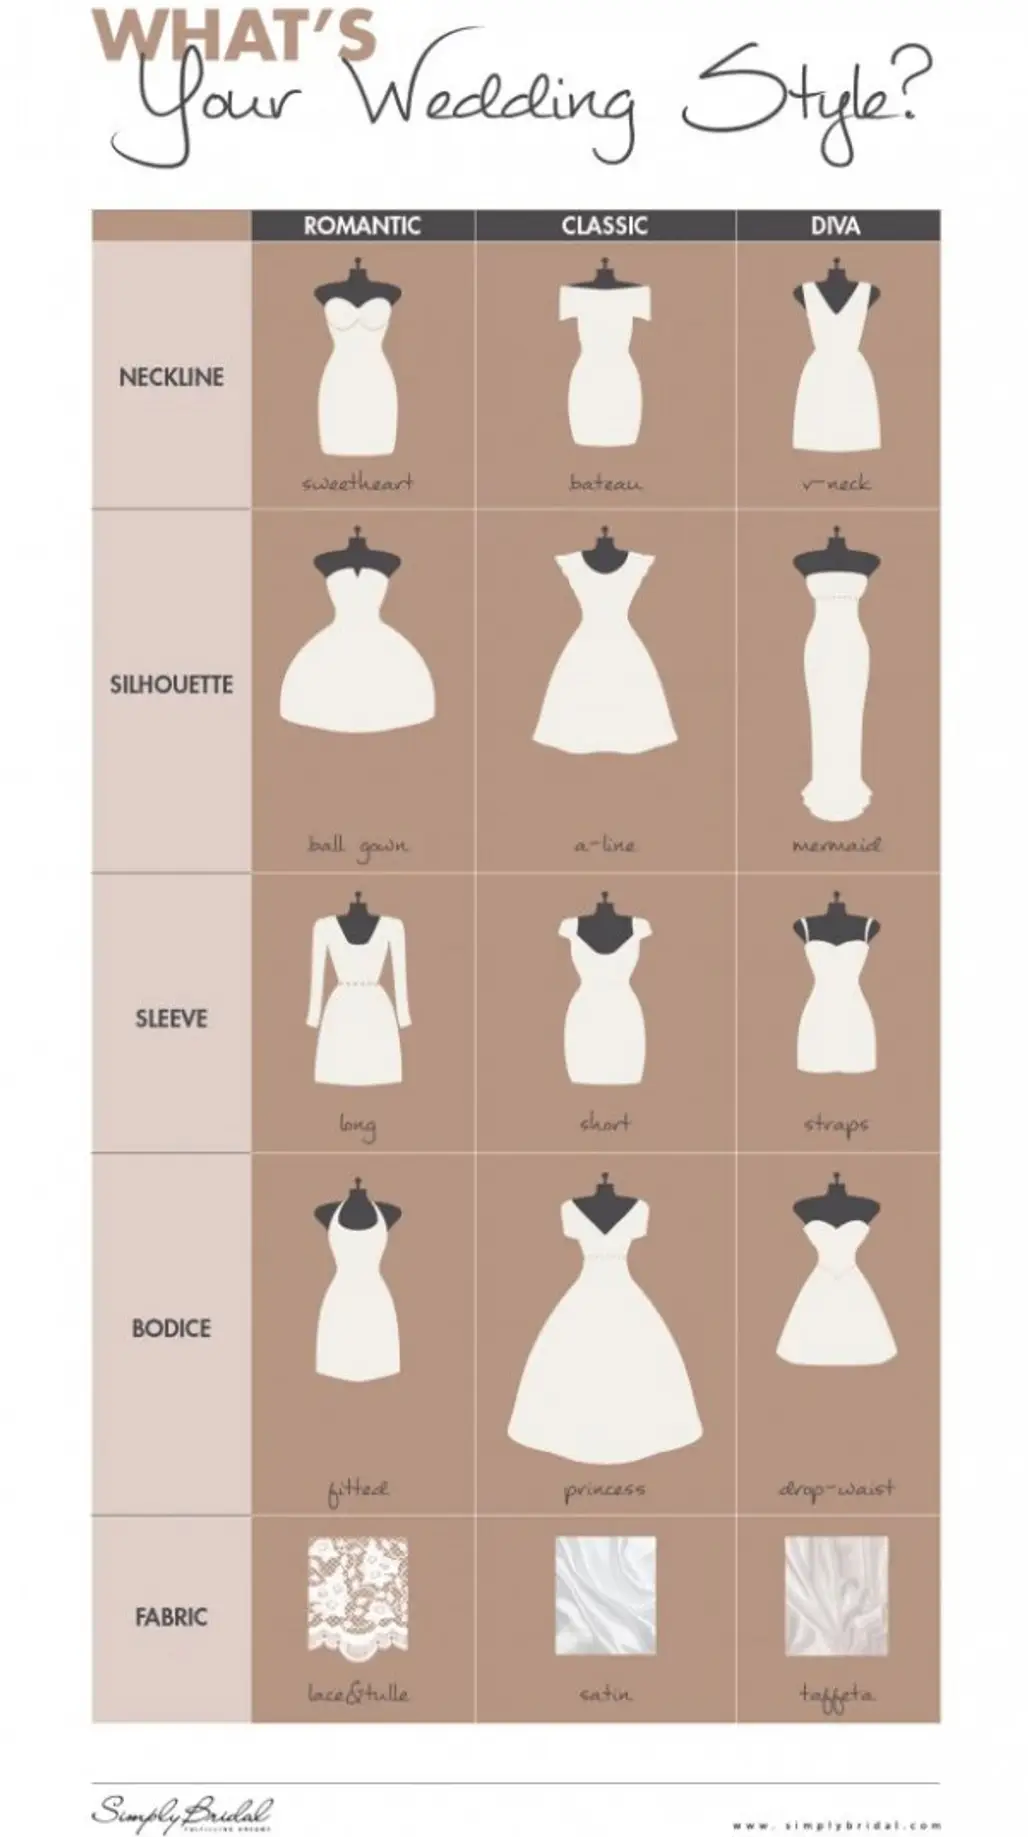 What Your Wedding Style?